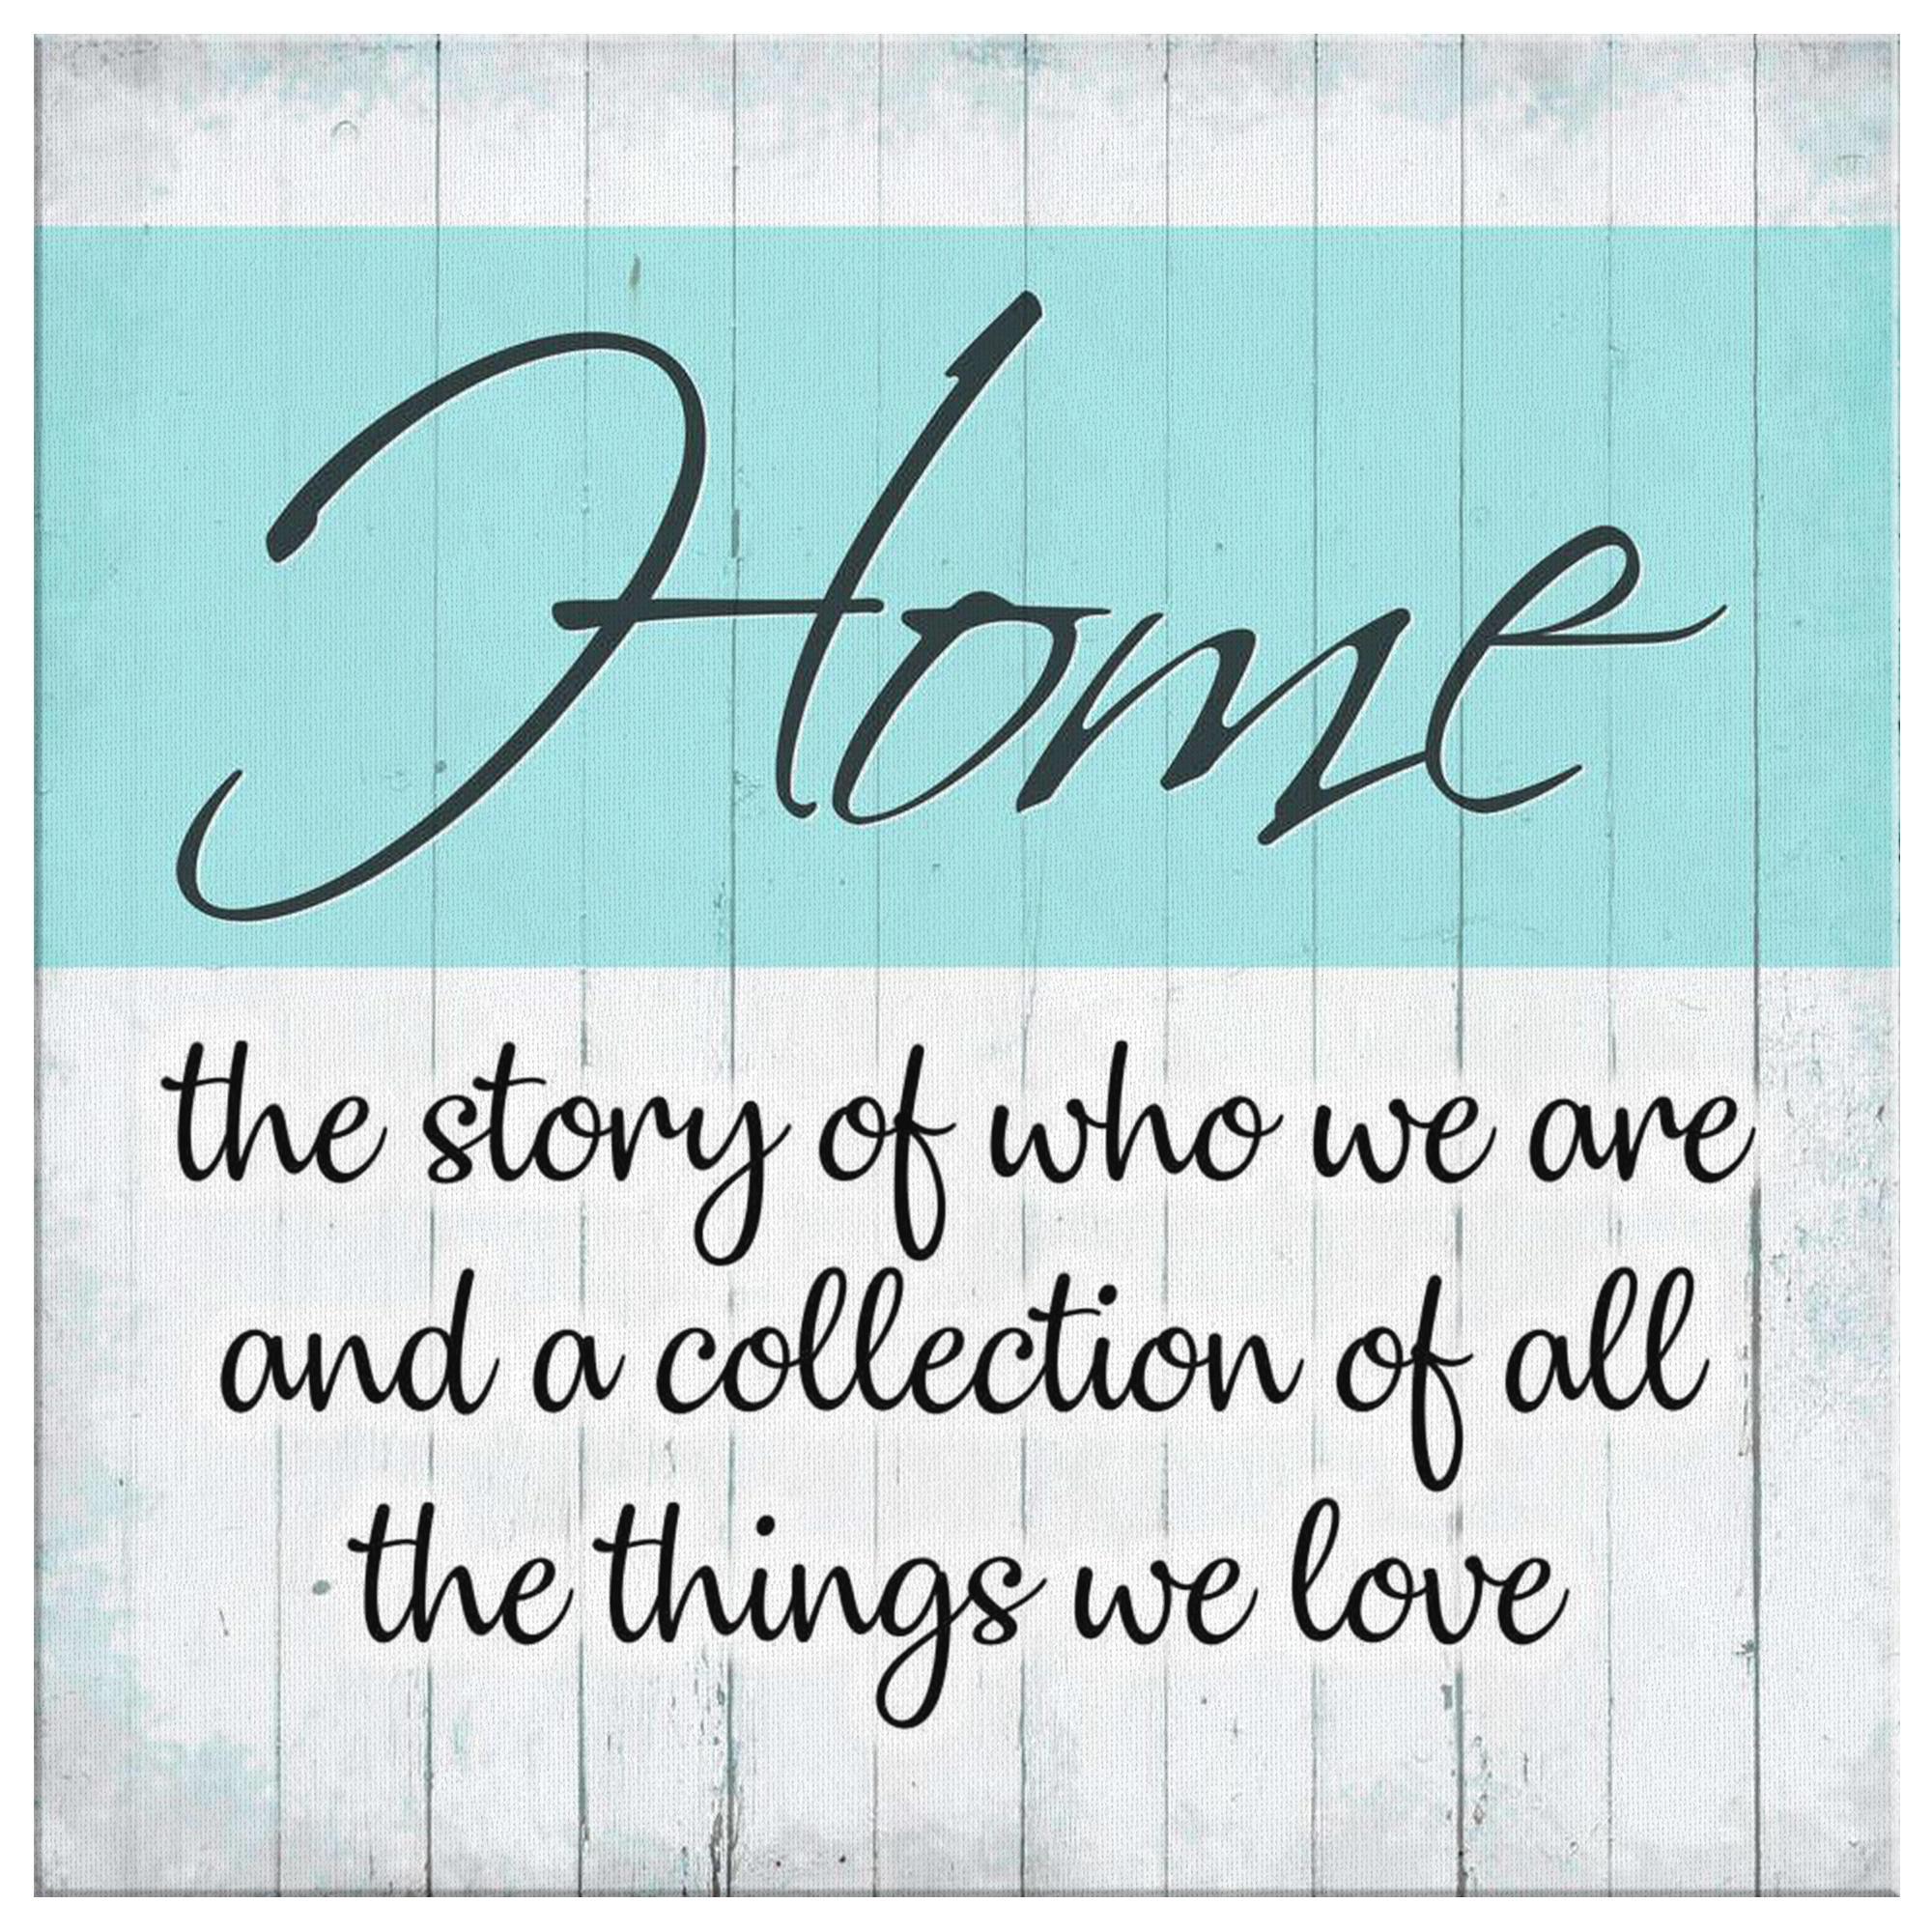 "Home - All the Things We Love" Premium Canvas